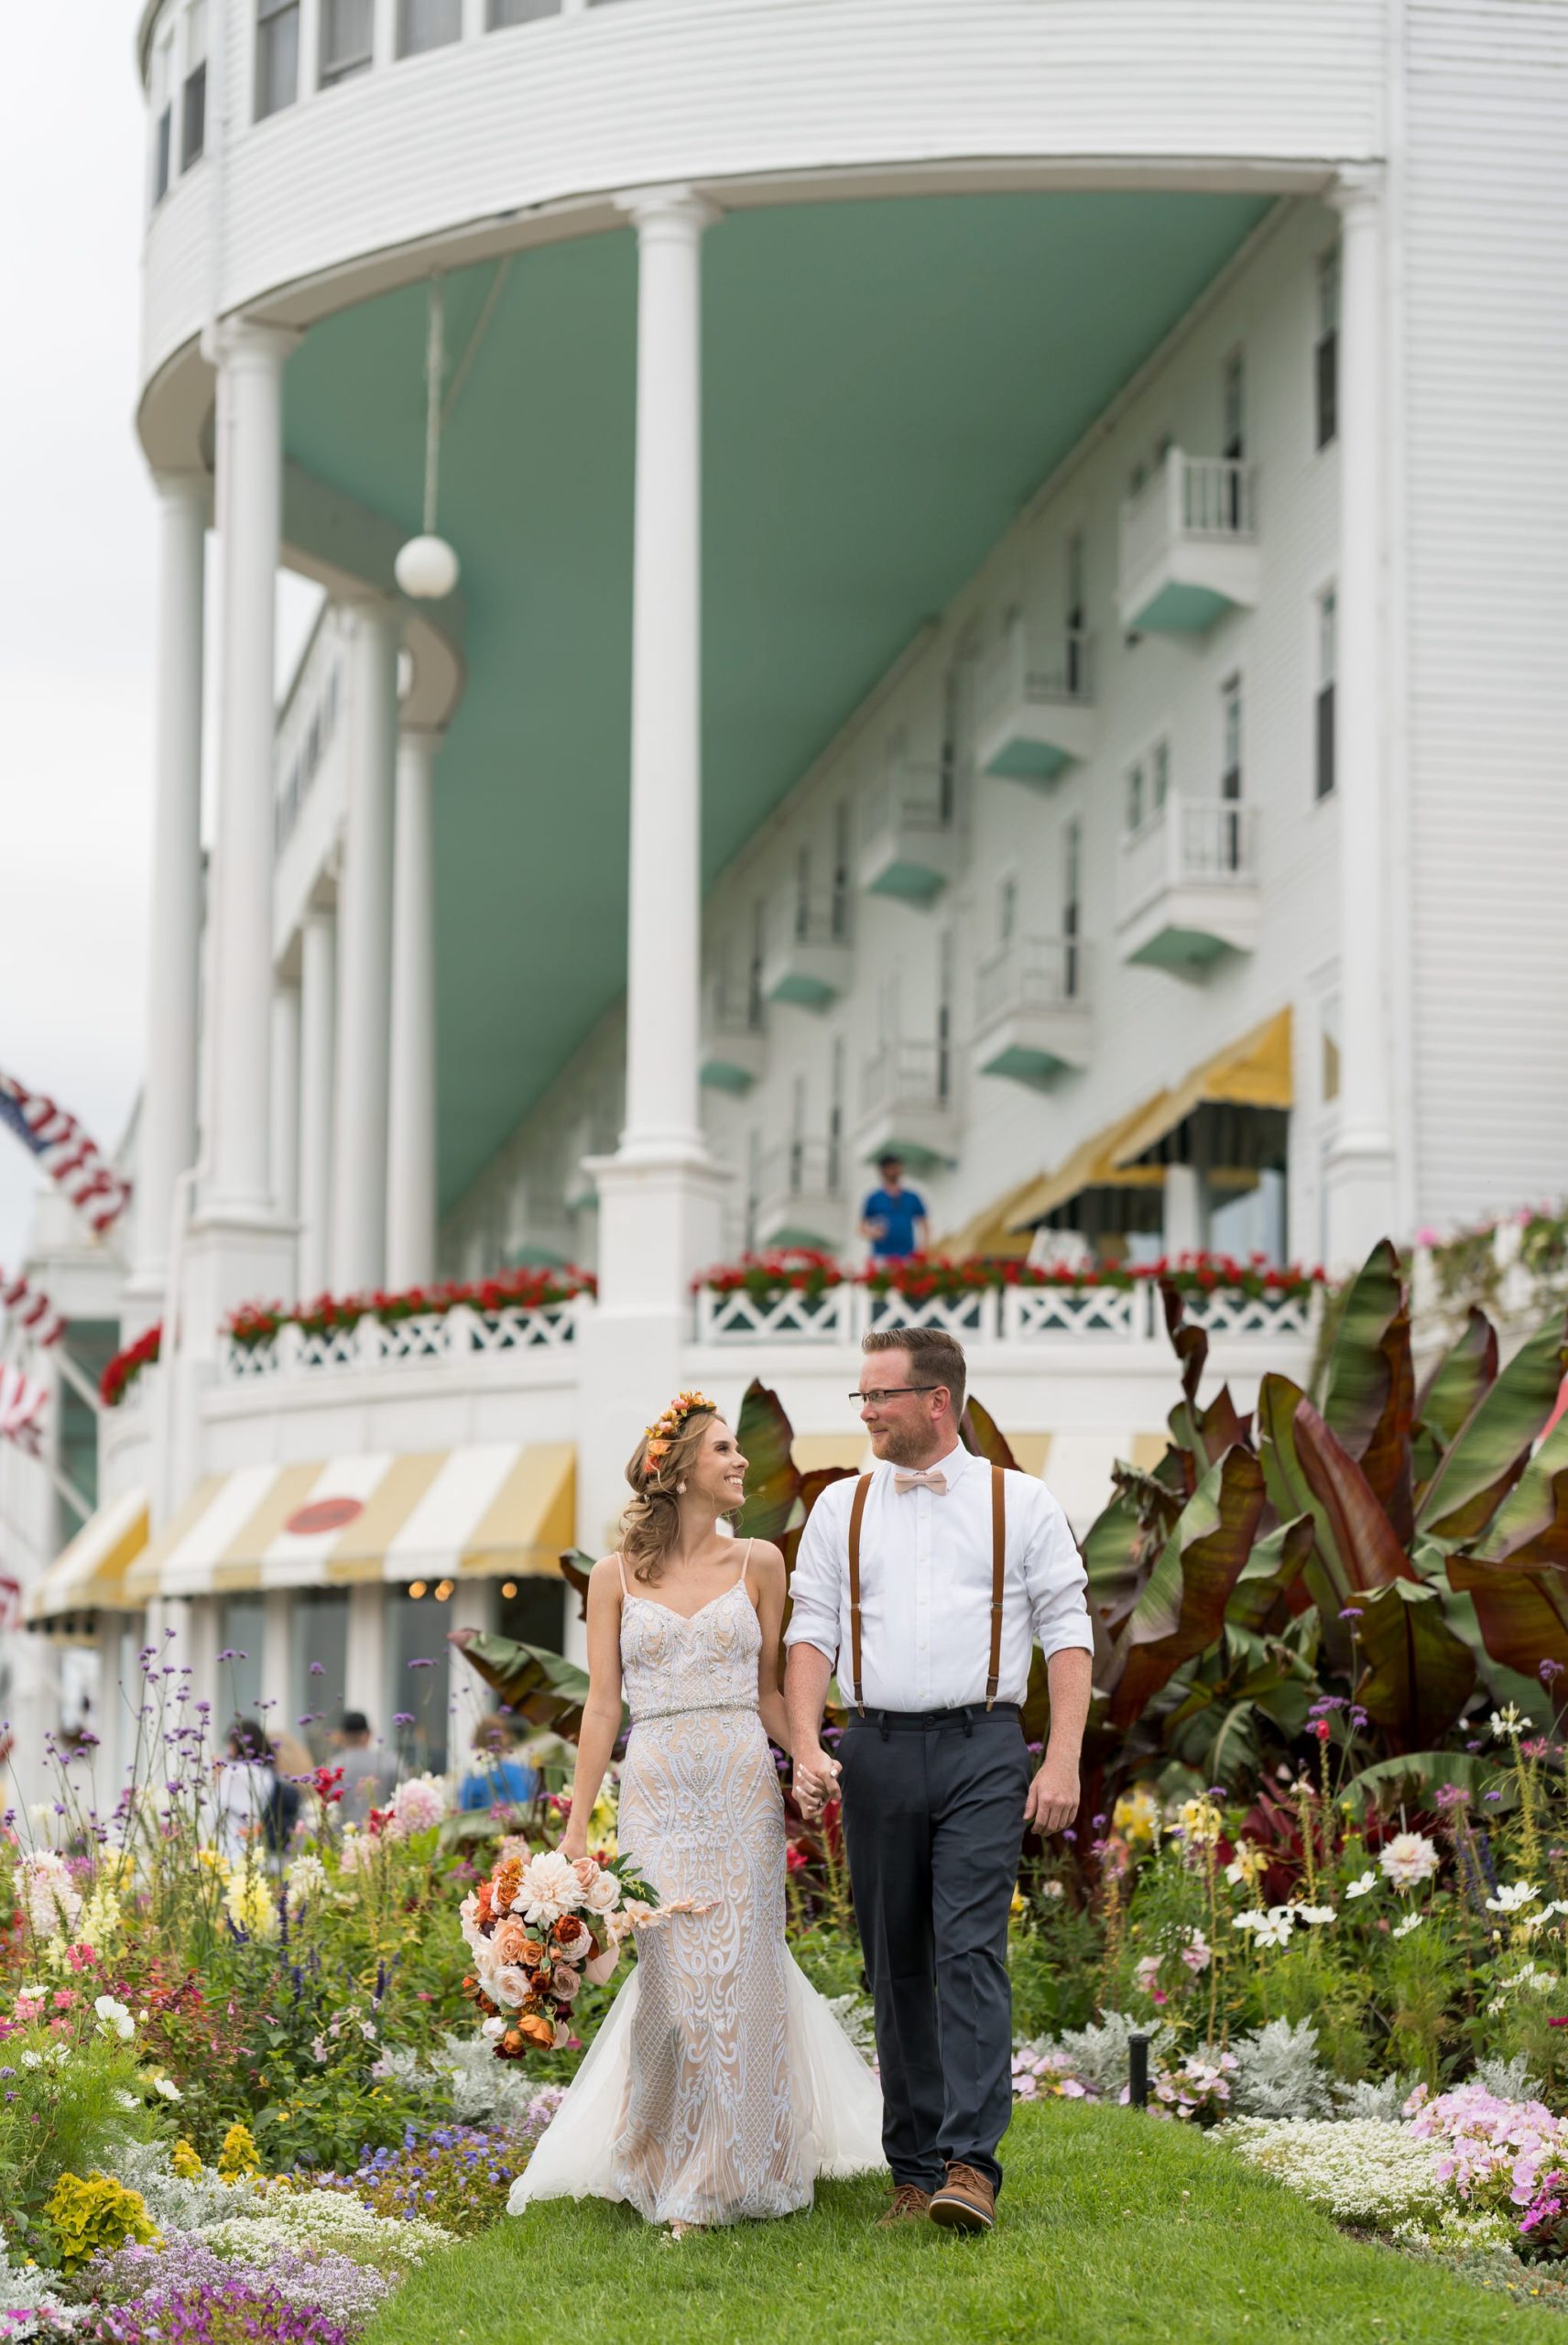 A bride and groom walk away from the Grand Hotel on Mackinac Island.  